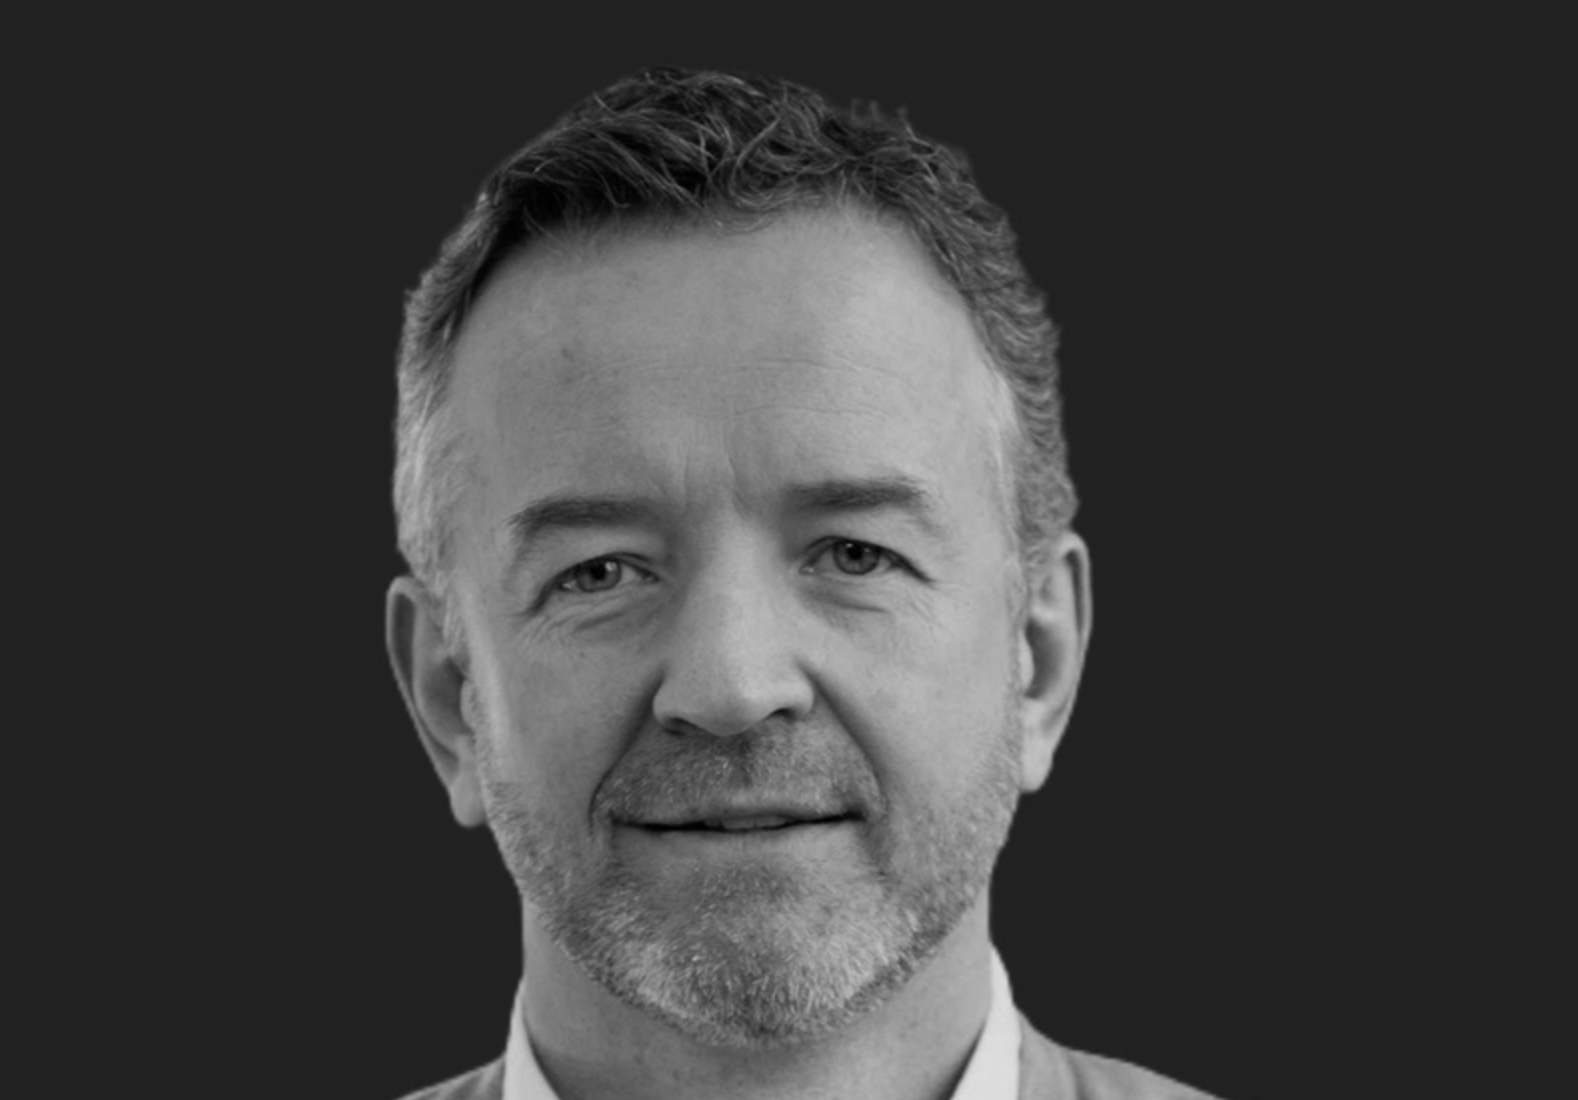 The Glimpse Group Accelerates Growth Potential With the Appointment of Immersive Technology Marketing Veteran James Watson as Chief Marketing Officer